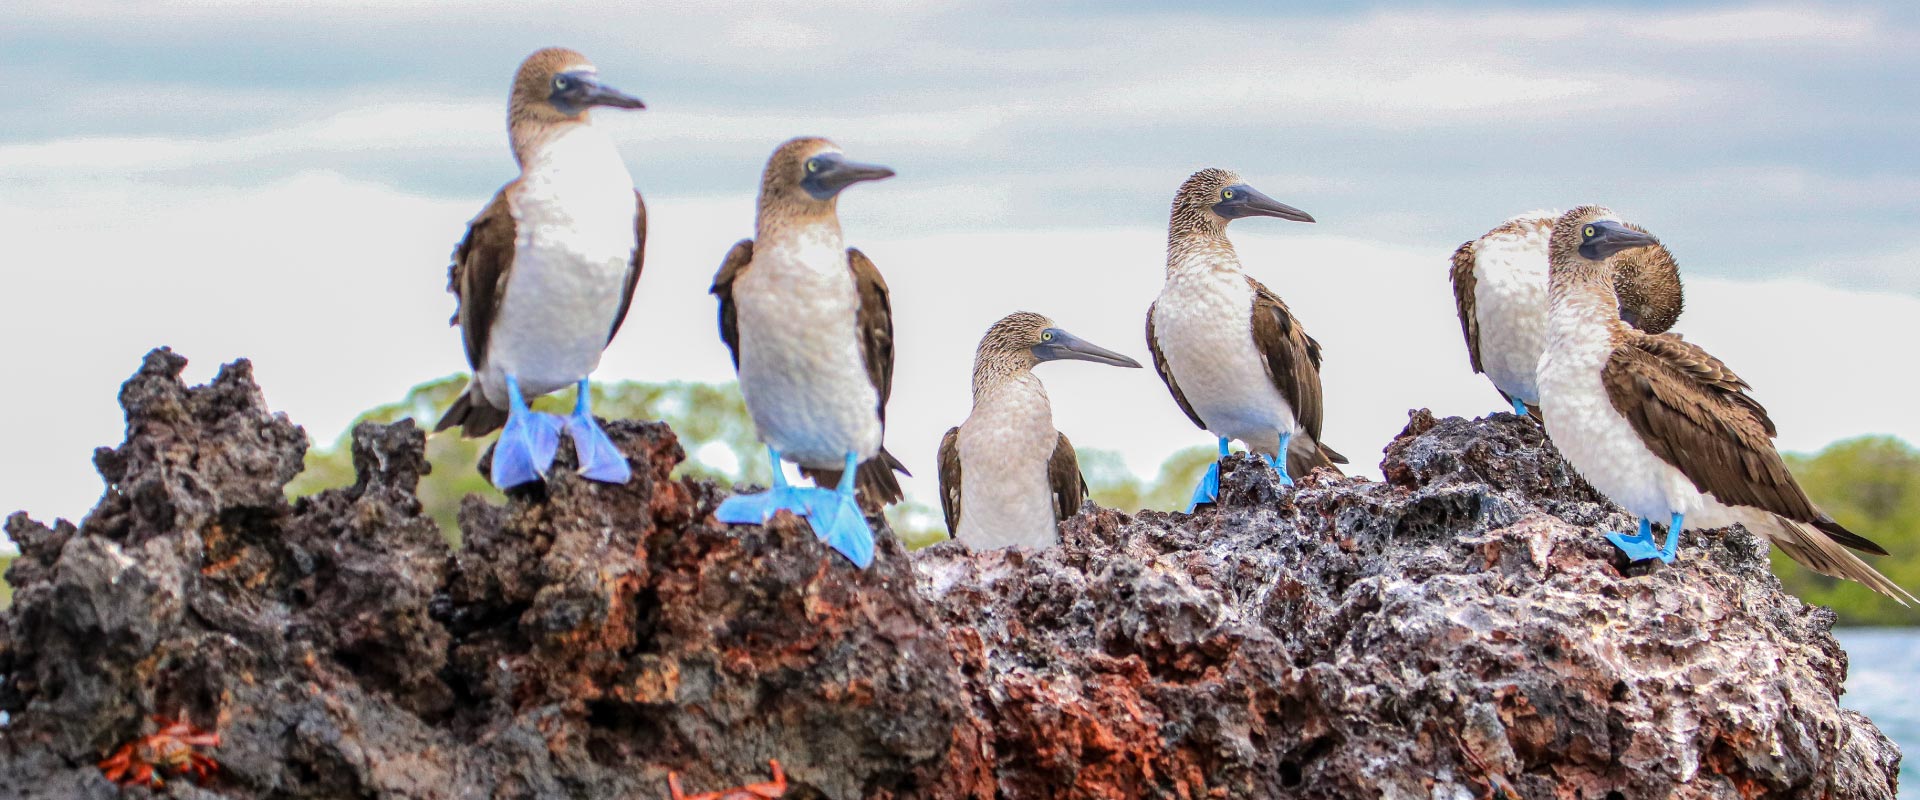 Embark on a unique Galapagos Islands journey tailored for self-flying aviation enthusiasts. Join a select group of pilots and explore the wonders of this iconic destination together."